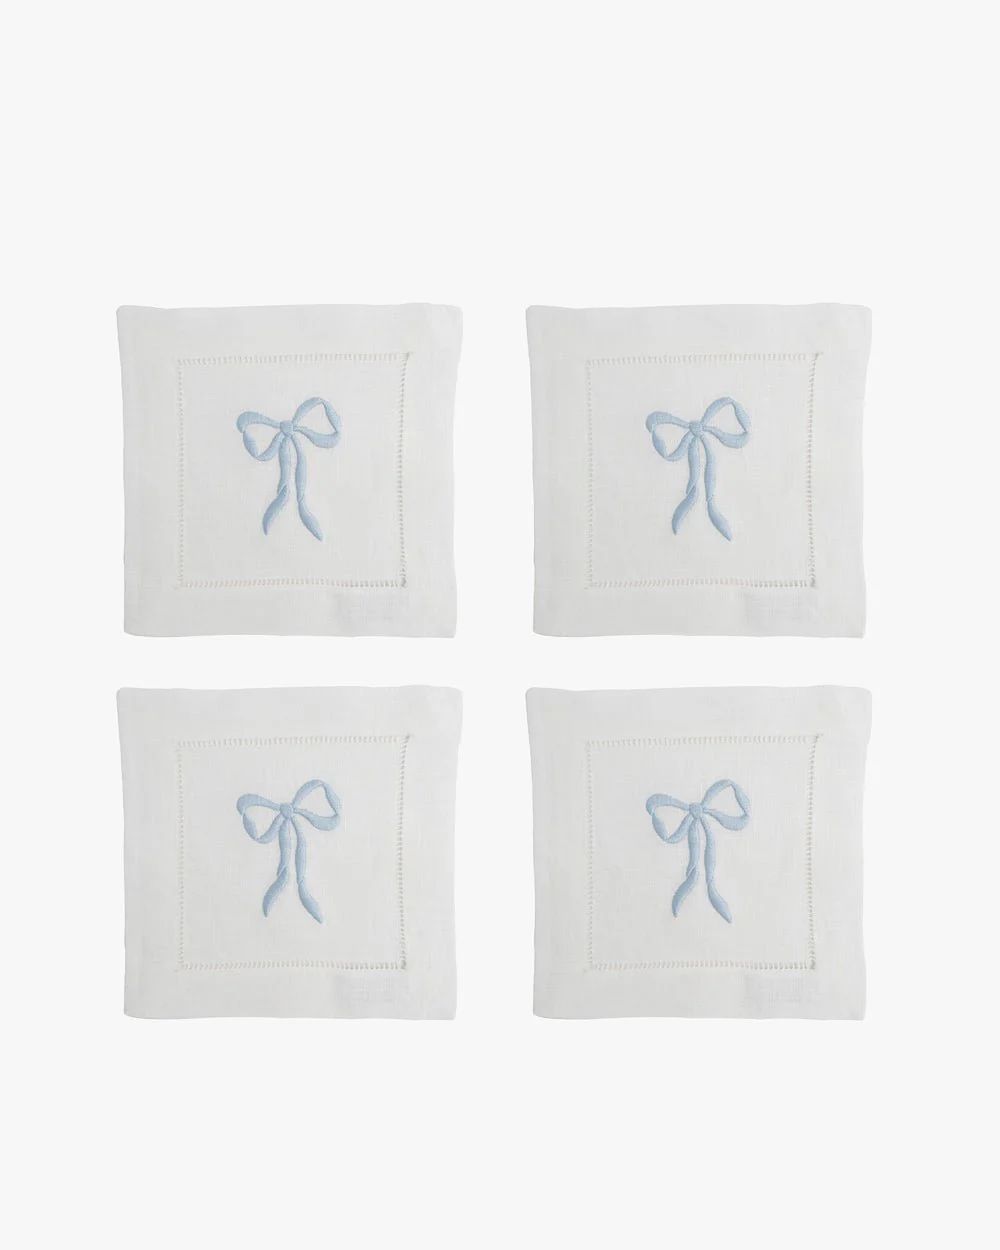 blue bow cocktail napkins (set of 4)

                      -

                      $55 | Cupcakes and Cashmere